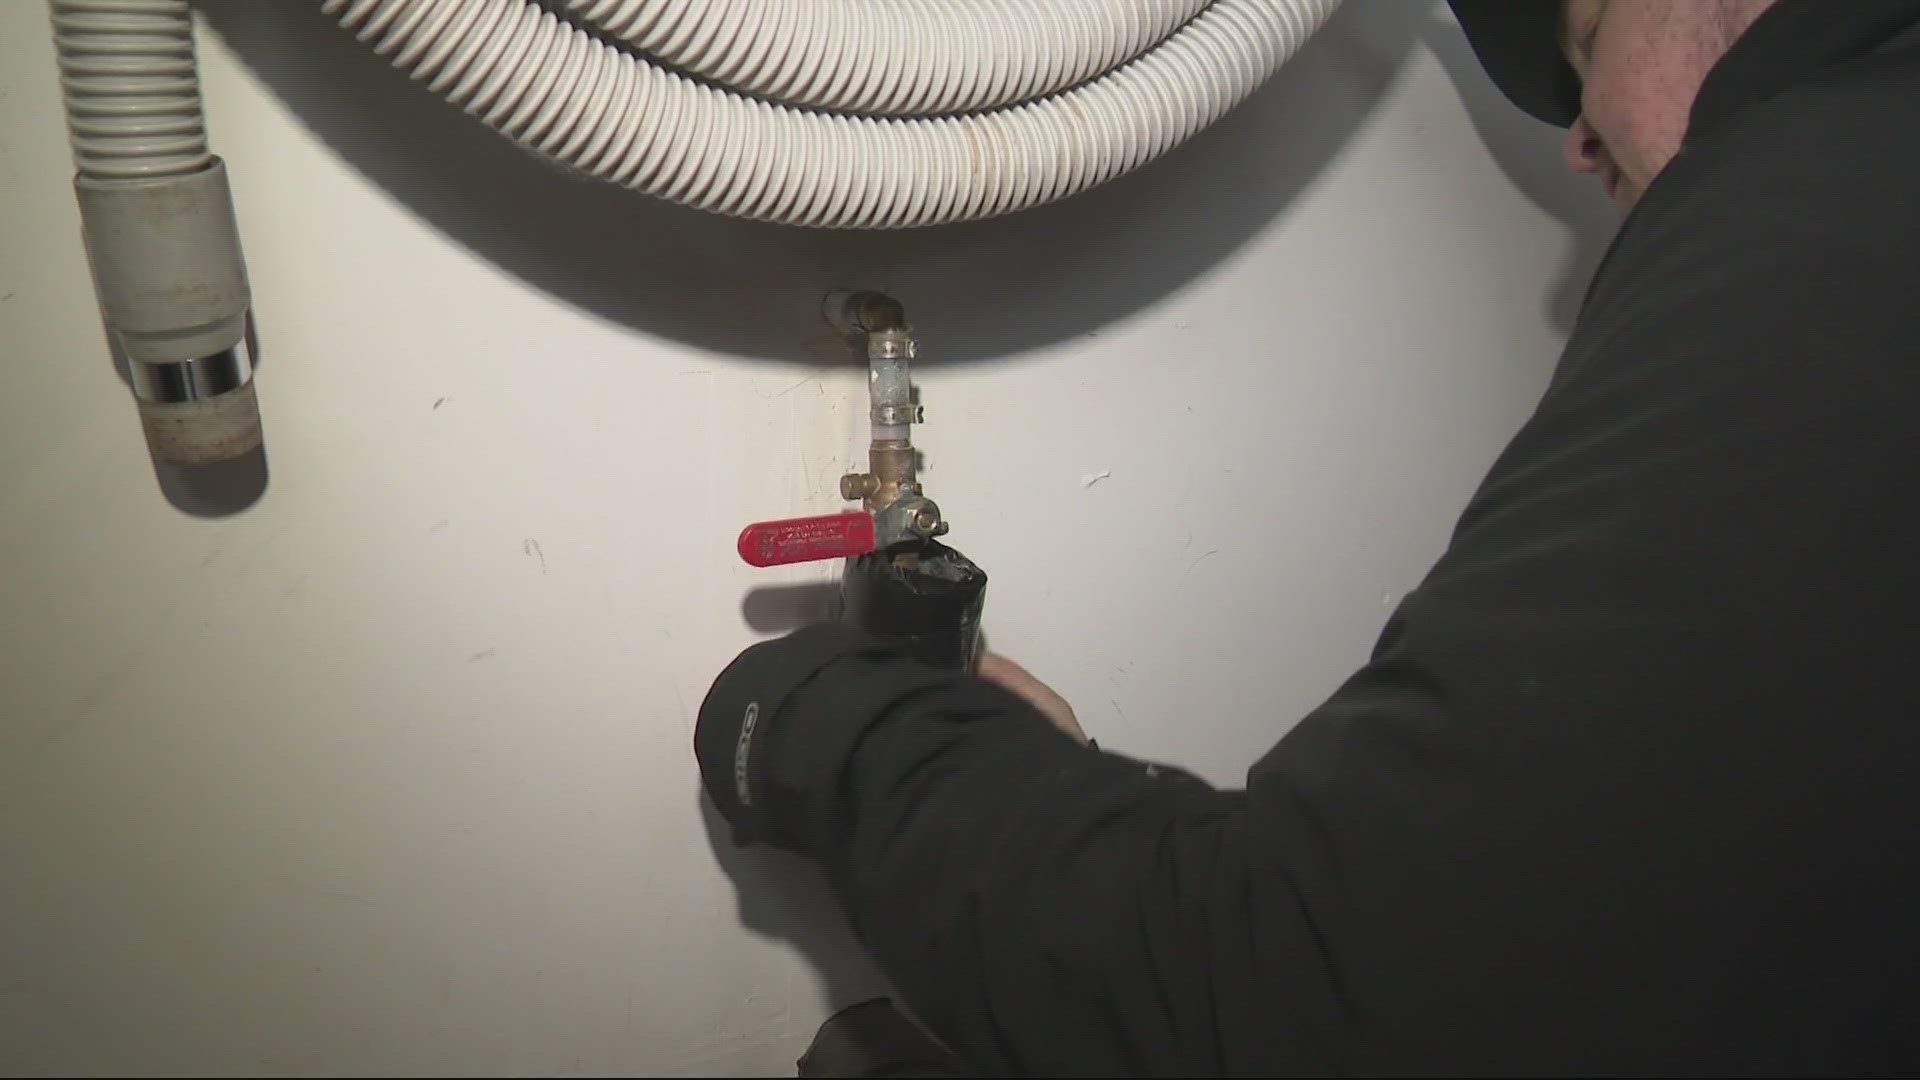 Plumbers recommend not skimping on turning up the heat, saying a burst pipe often leads to a pricier clean up than a heft electric bill.